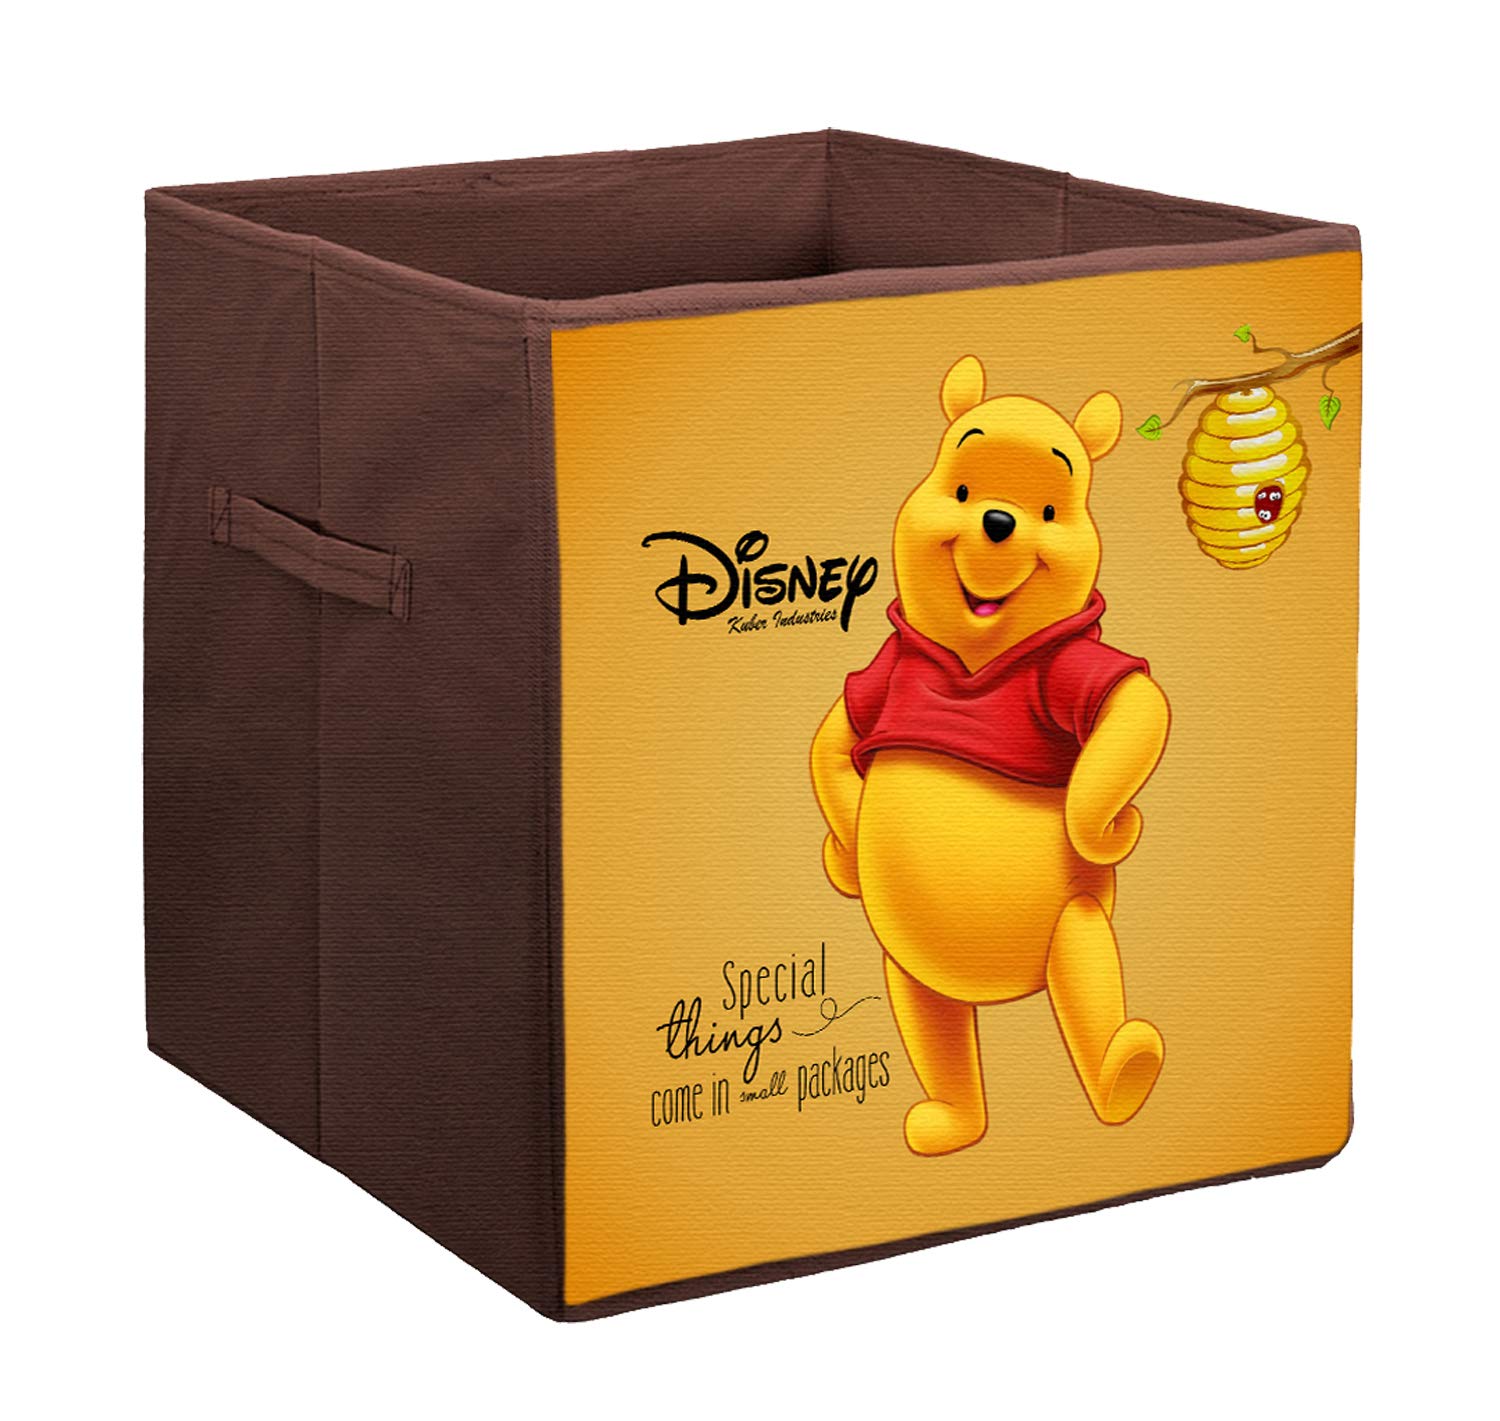 Kuber Industries Disney Winnie-The-Pooh Print Non Woven Fabric Square Foldable Wardrobe Organizer Cube Cloth Cover Storage Box with Handle (Large Size, Brown)